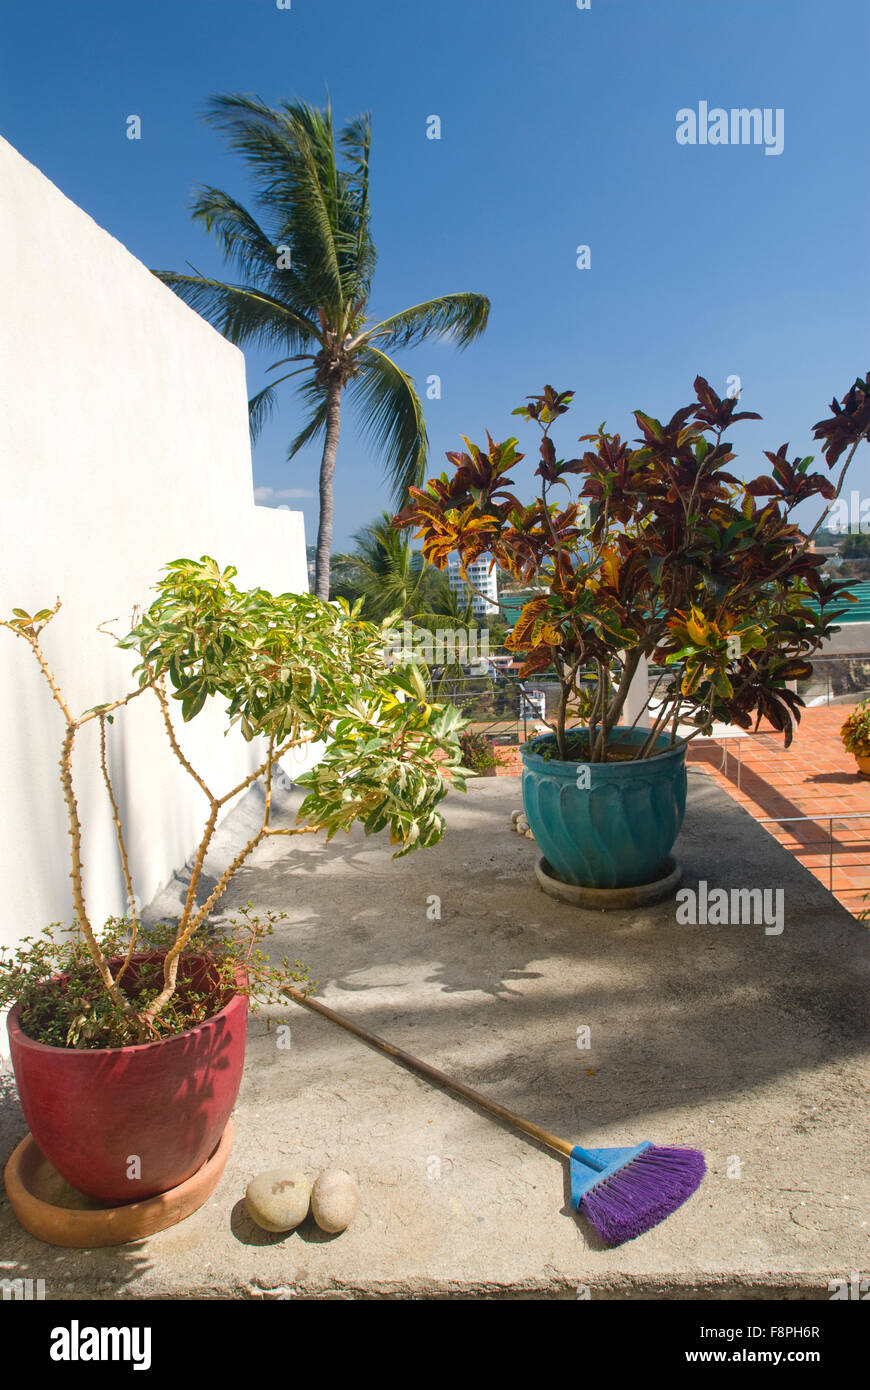 Old broom lying near flower pots on rooftop garden in Acapulco, Mexico Stock Photo